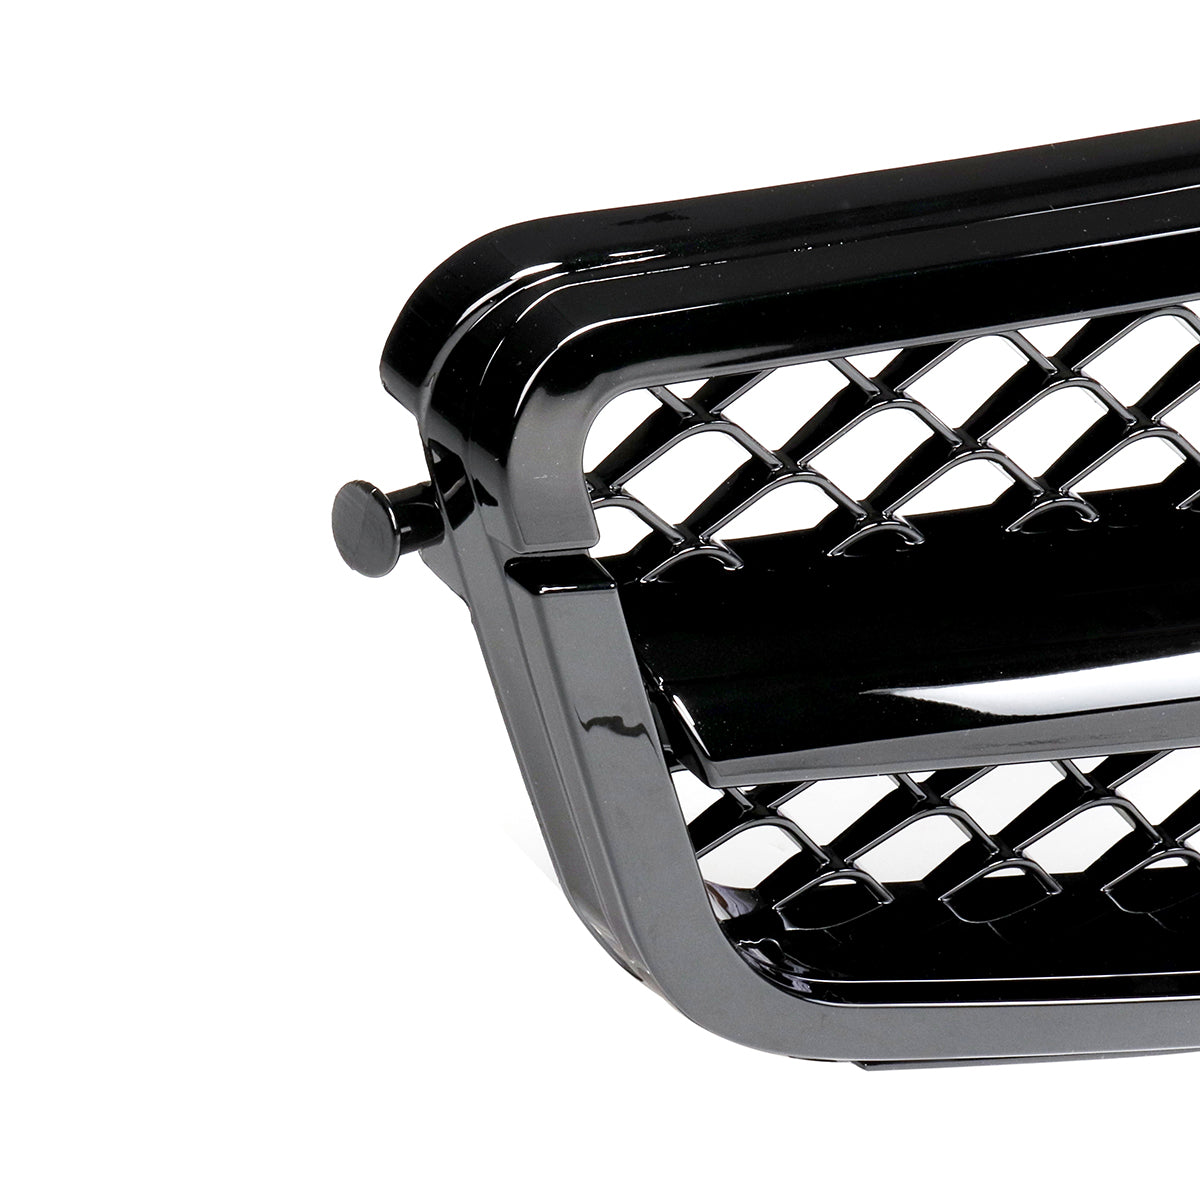 Dim Gray Car C63 AMG Style Front Upper Grille Grill For Mercedes C Class W204 C180 C200 C300 C350 2008-2014